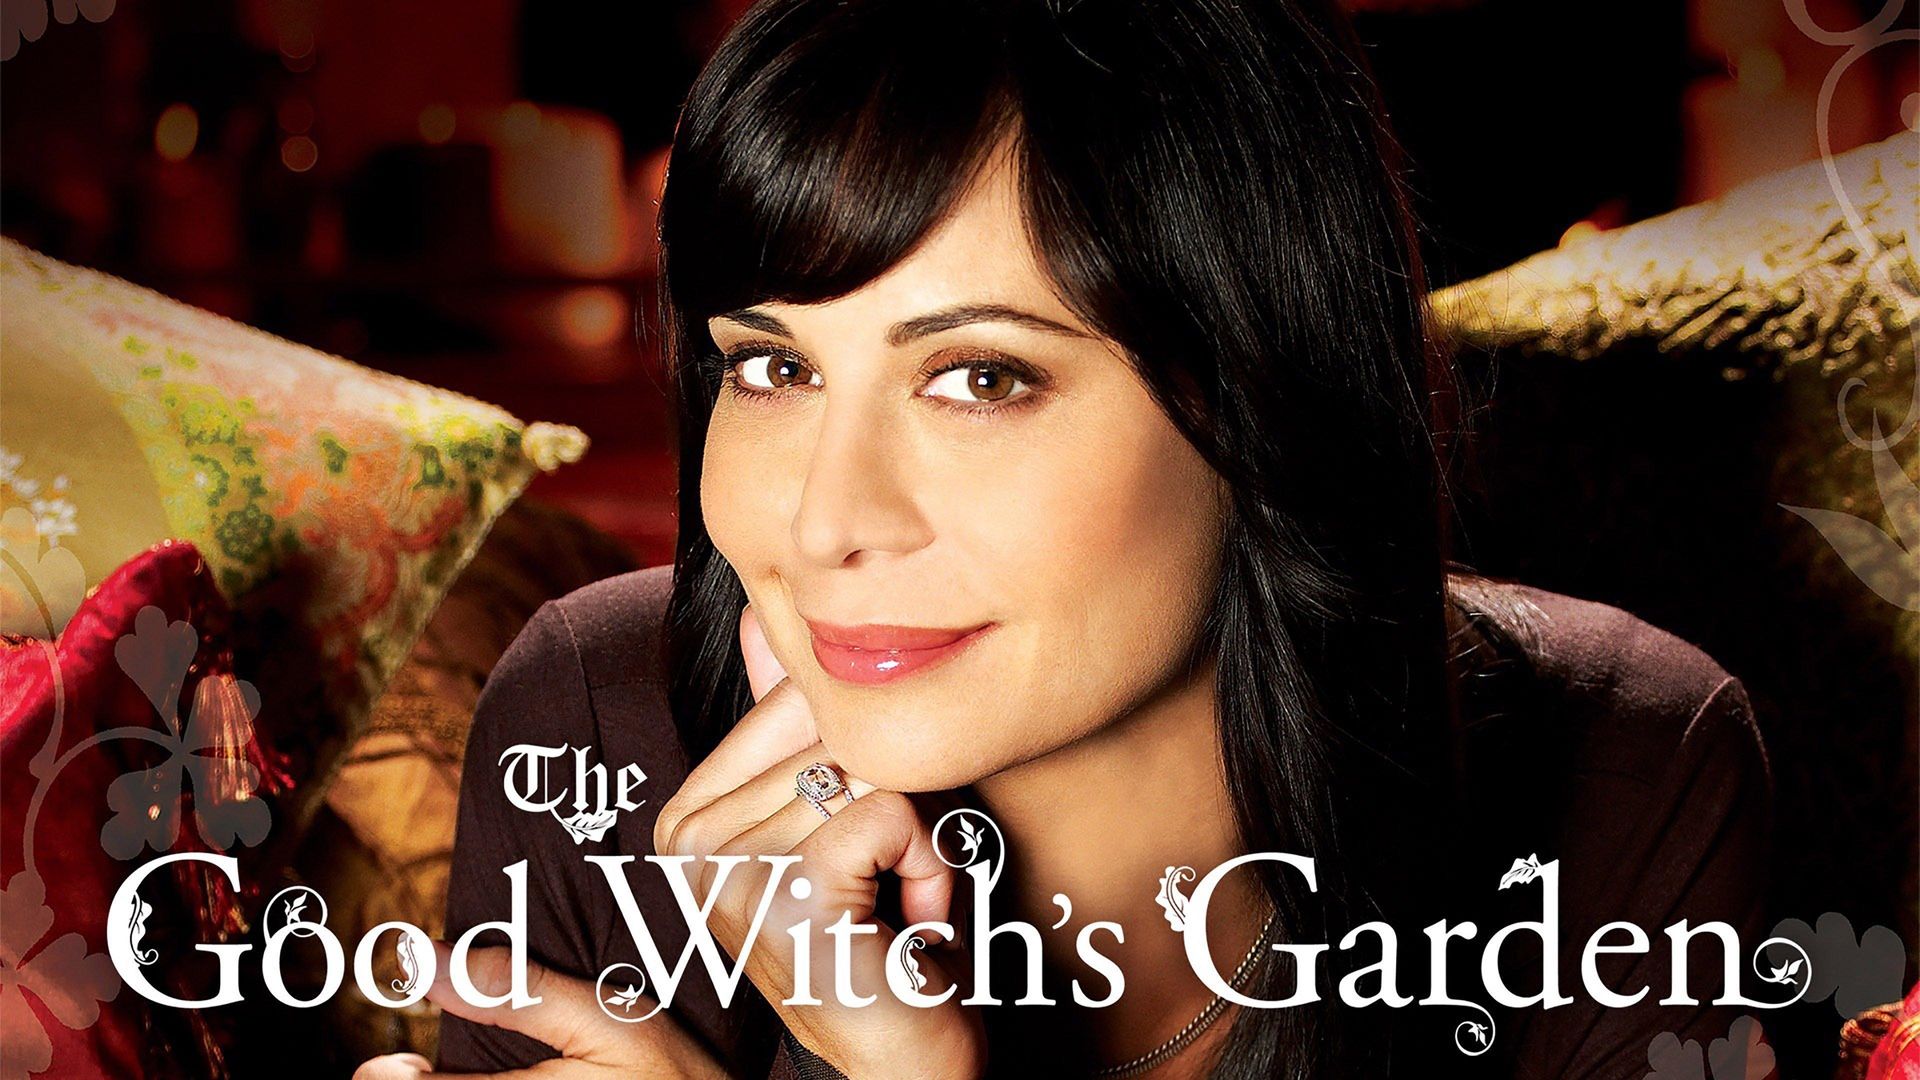 The Good Witch's Garden Backdrop